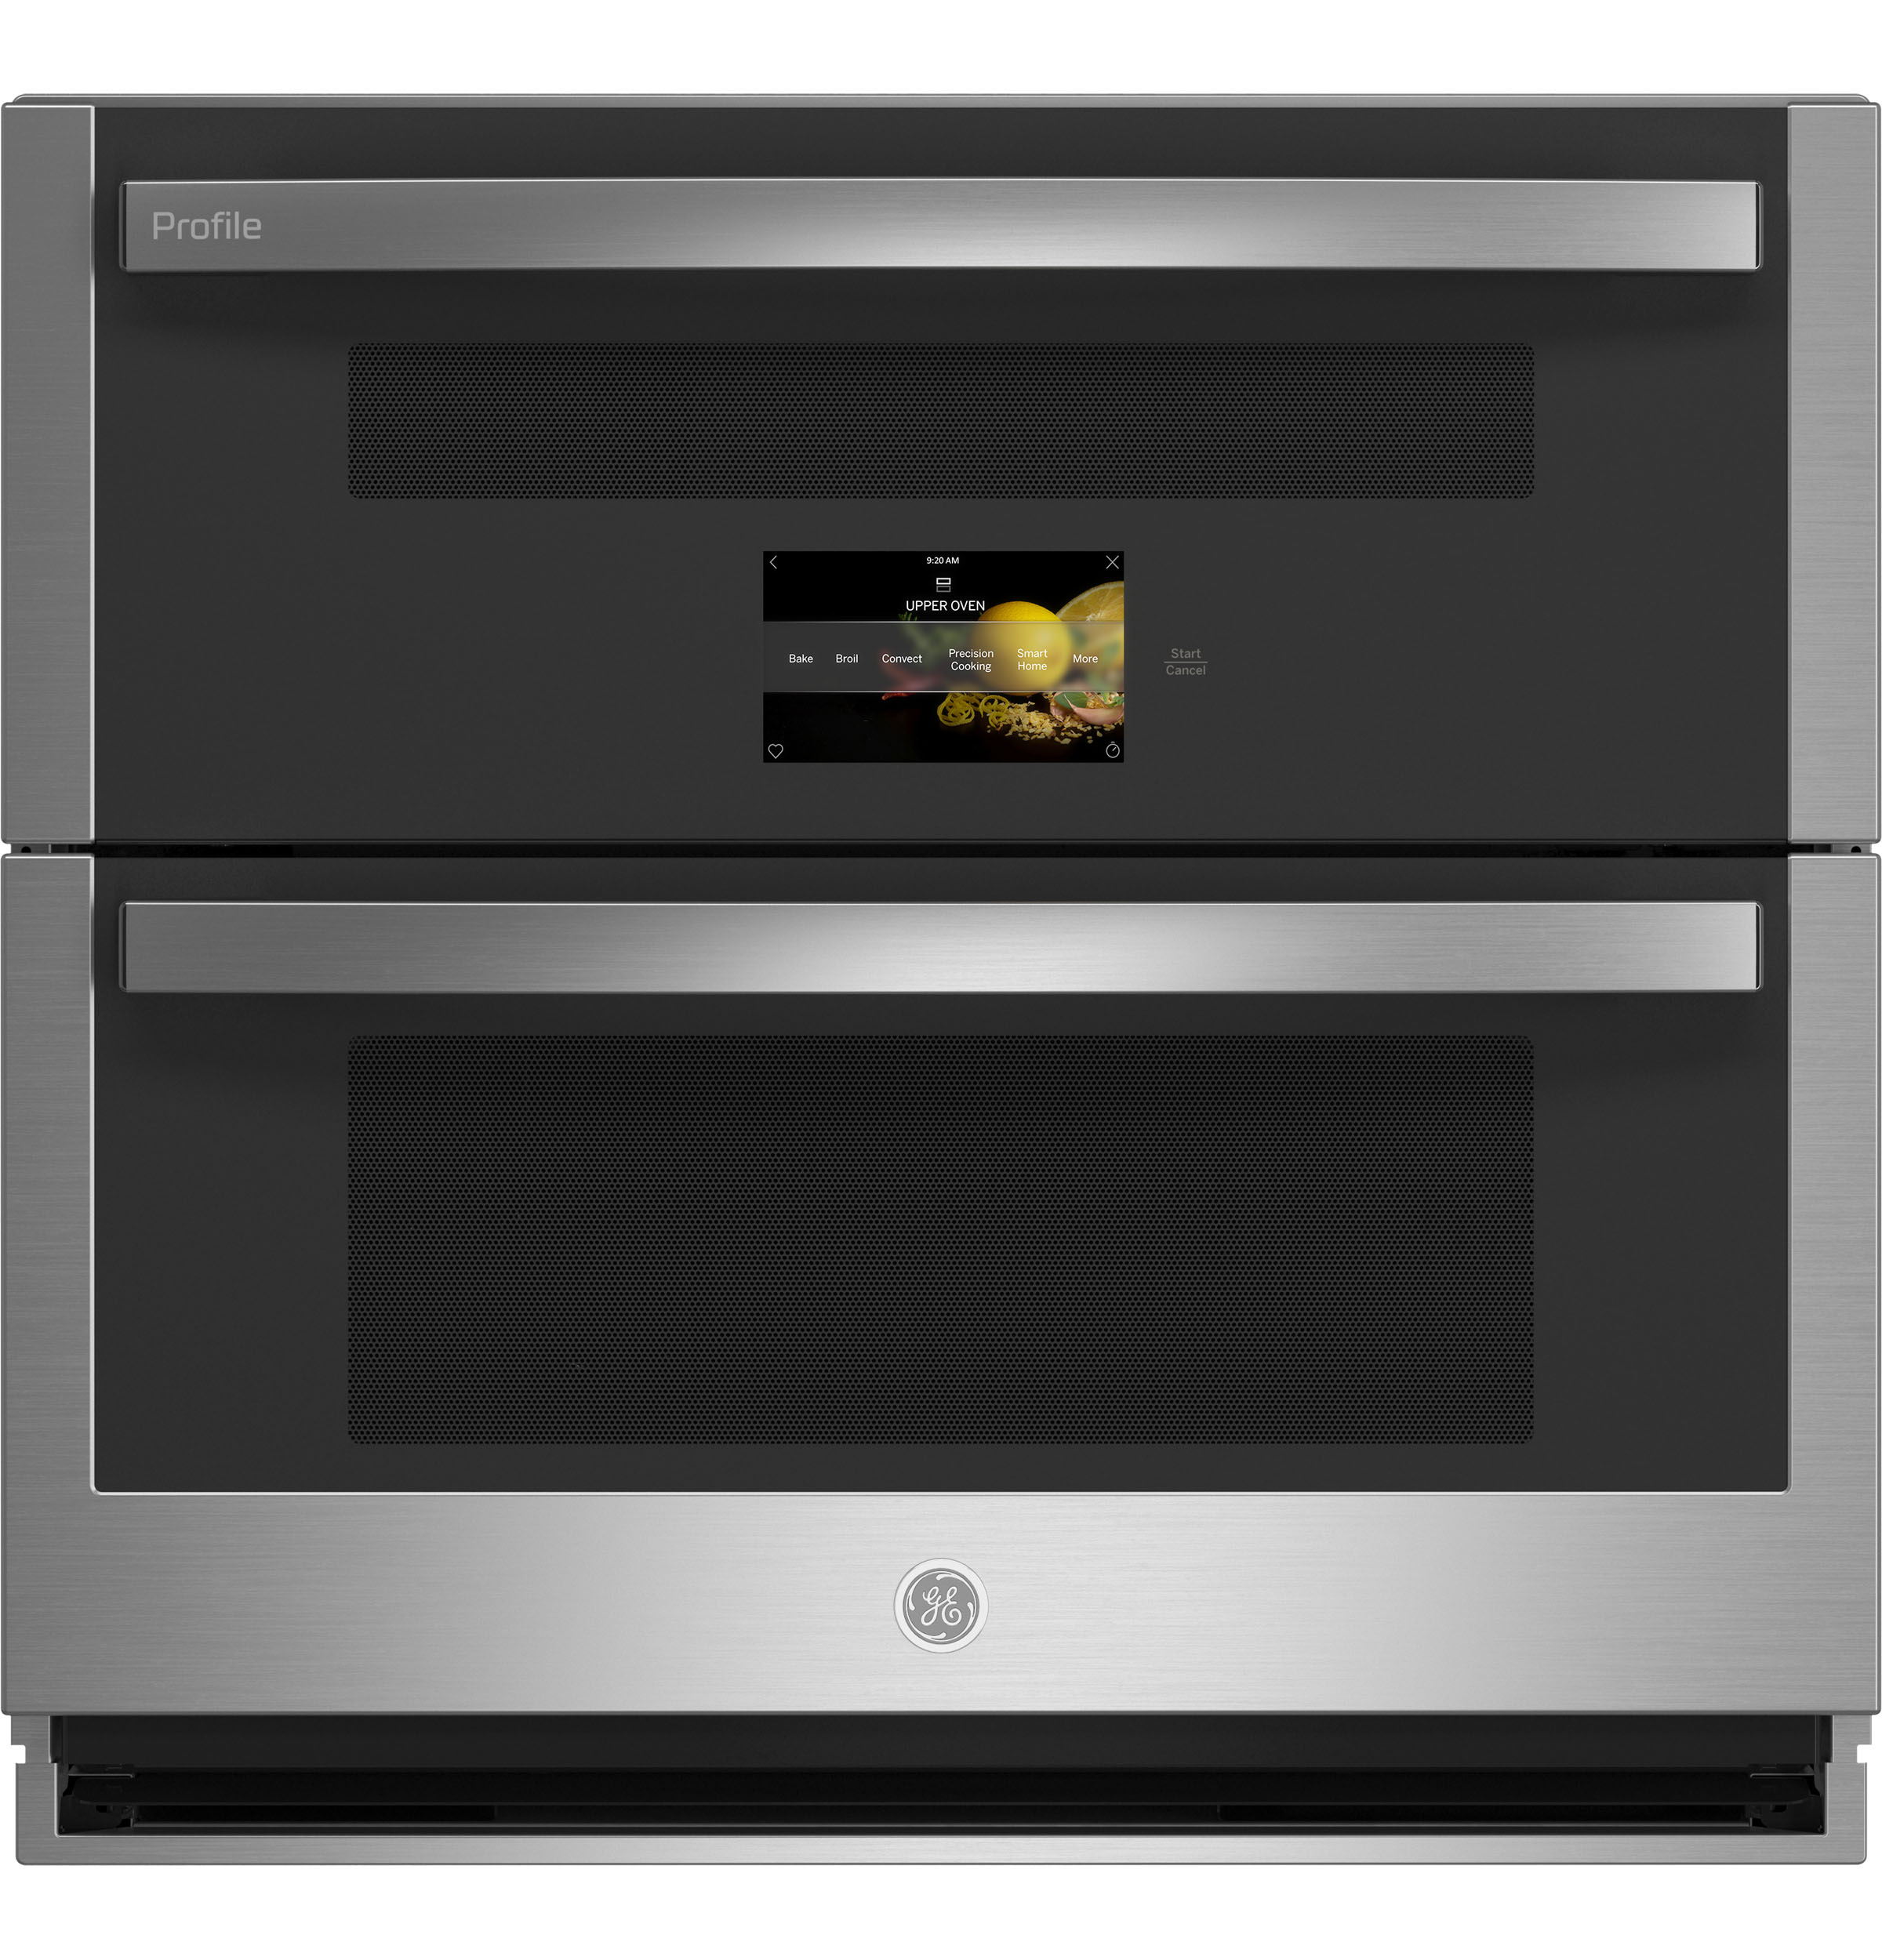 GE Profile Smart Oven Review: Does this modern appliance deliver